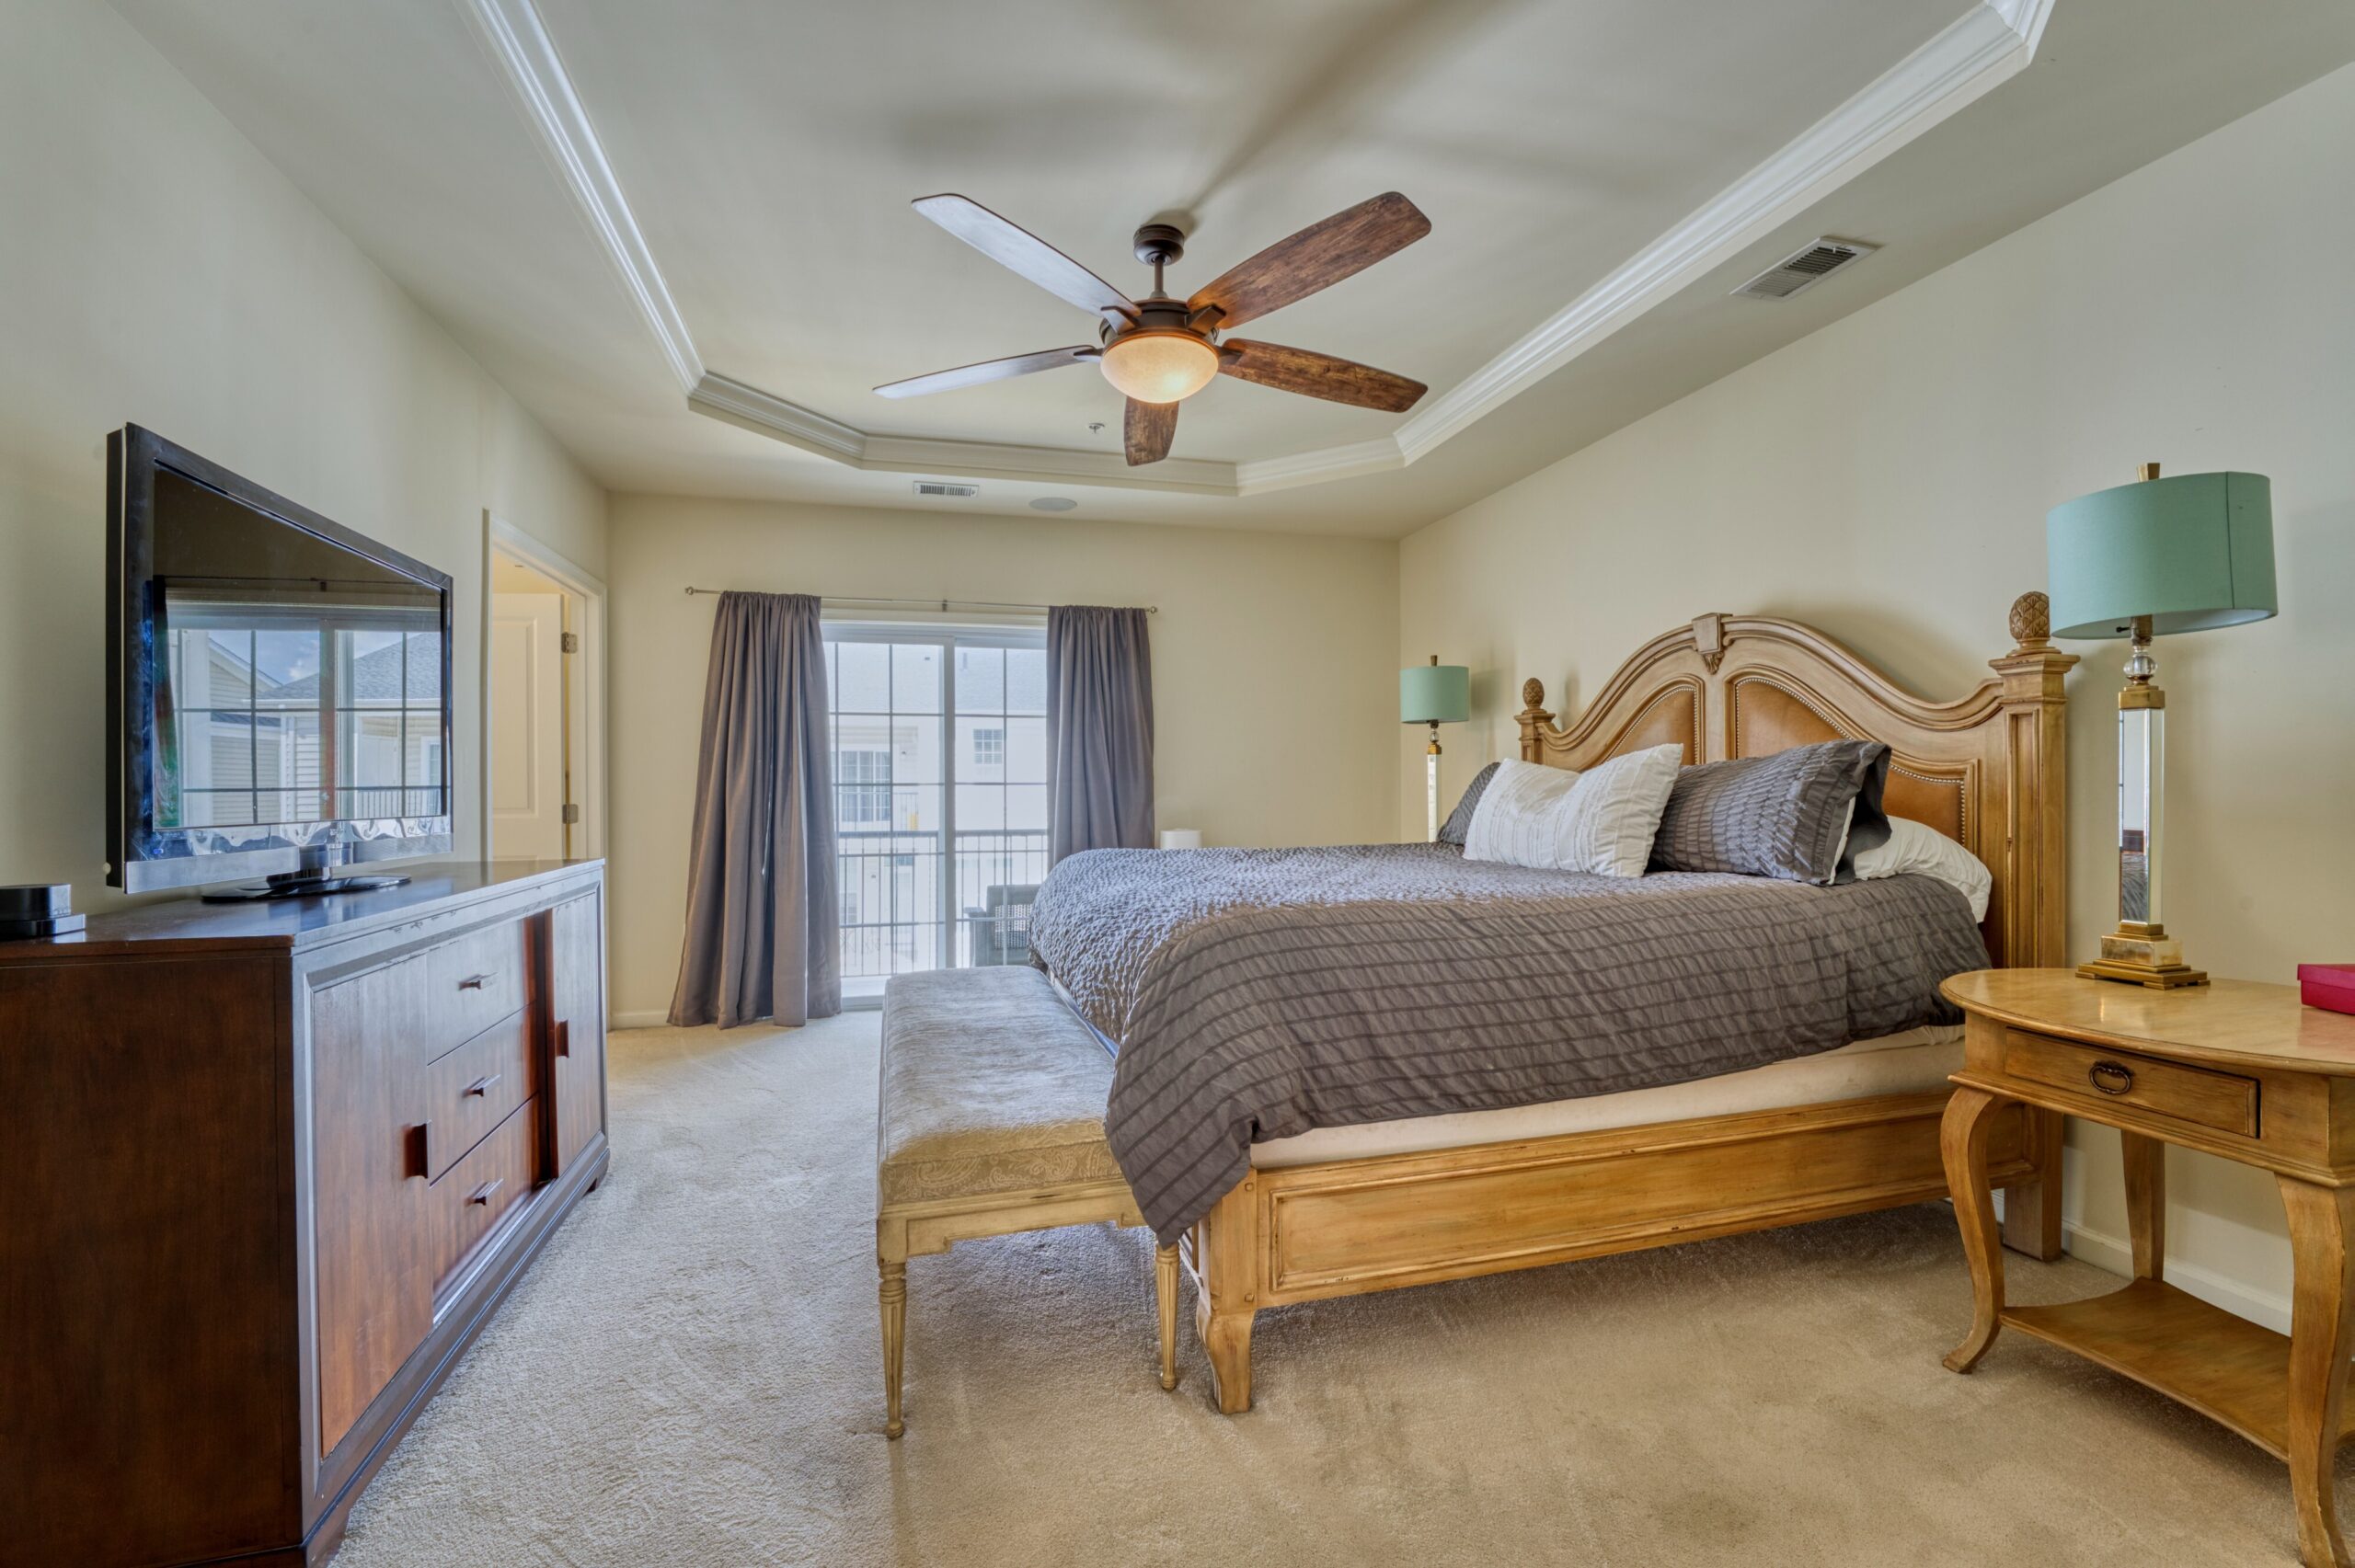 Professional interior photo of 23560 Buckland Farm Ter, Ashburn, VA - Showing the primary bedroom with cream carpeting, tray ceiling, private balcony through sliding doors